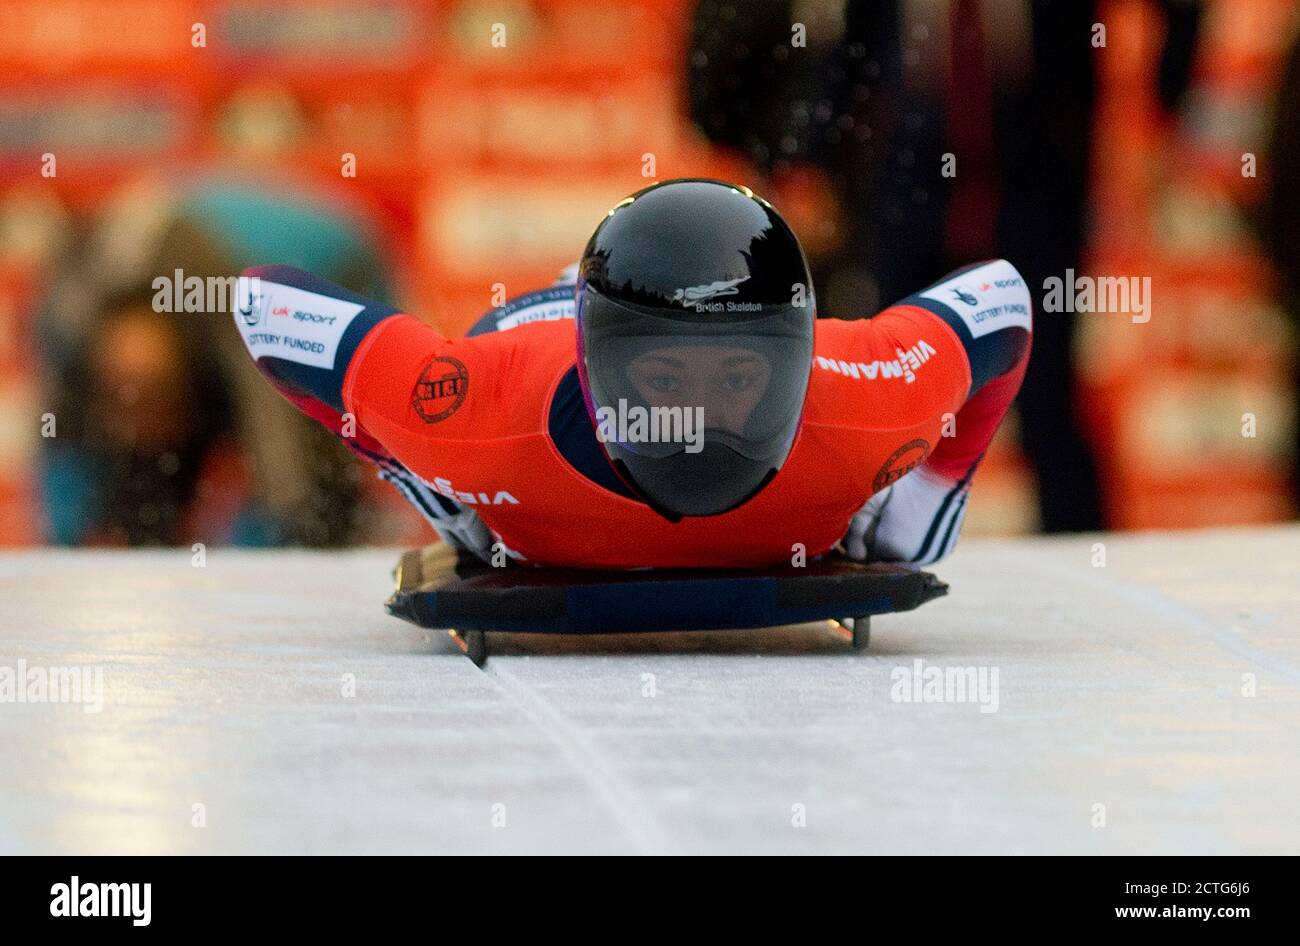 LIZZY YARNOLD ON HER WAY TO VICTORY IN THE WORLD CUP SKELETON EVENT IN IGLS, AUSTRIA. Copyright Picture : © MARK PAIN / ALAMY Stock Photo